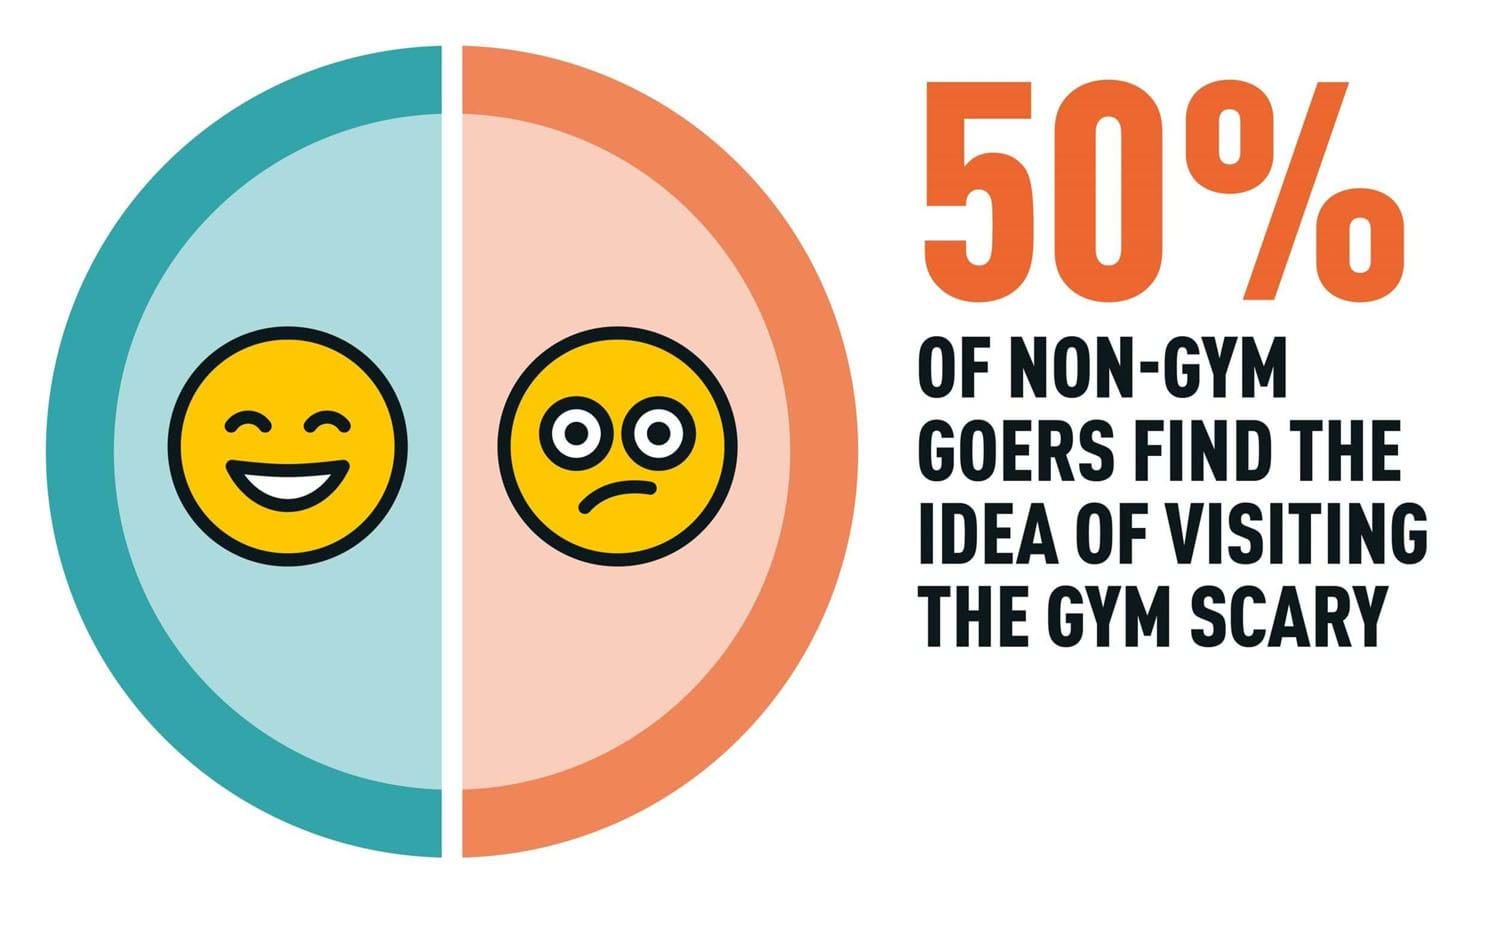 50% of non-gym goers find the idea of vising the gym scary